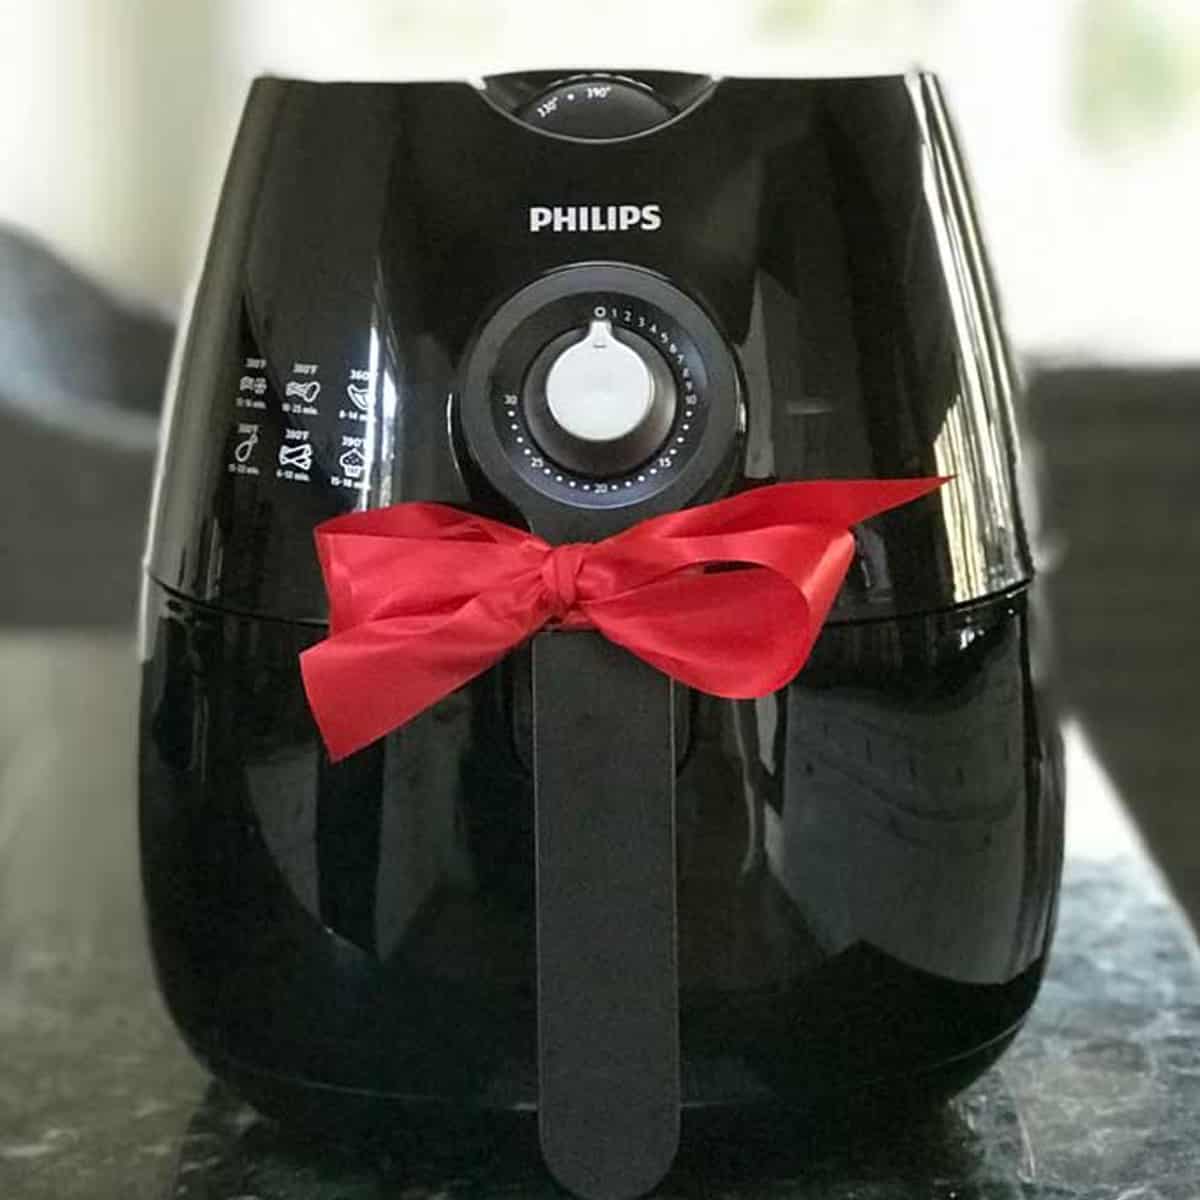 Air fryer with gift bow in kitchen